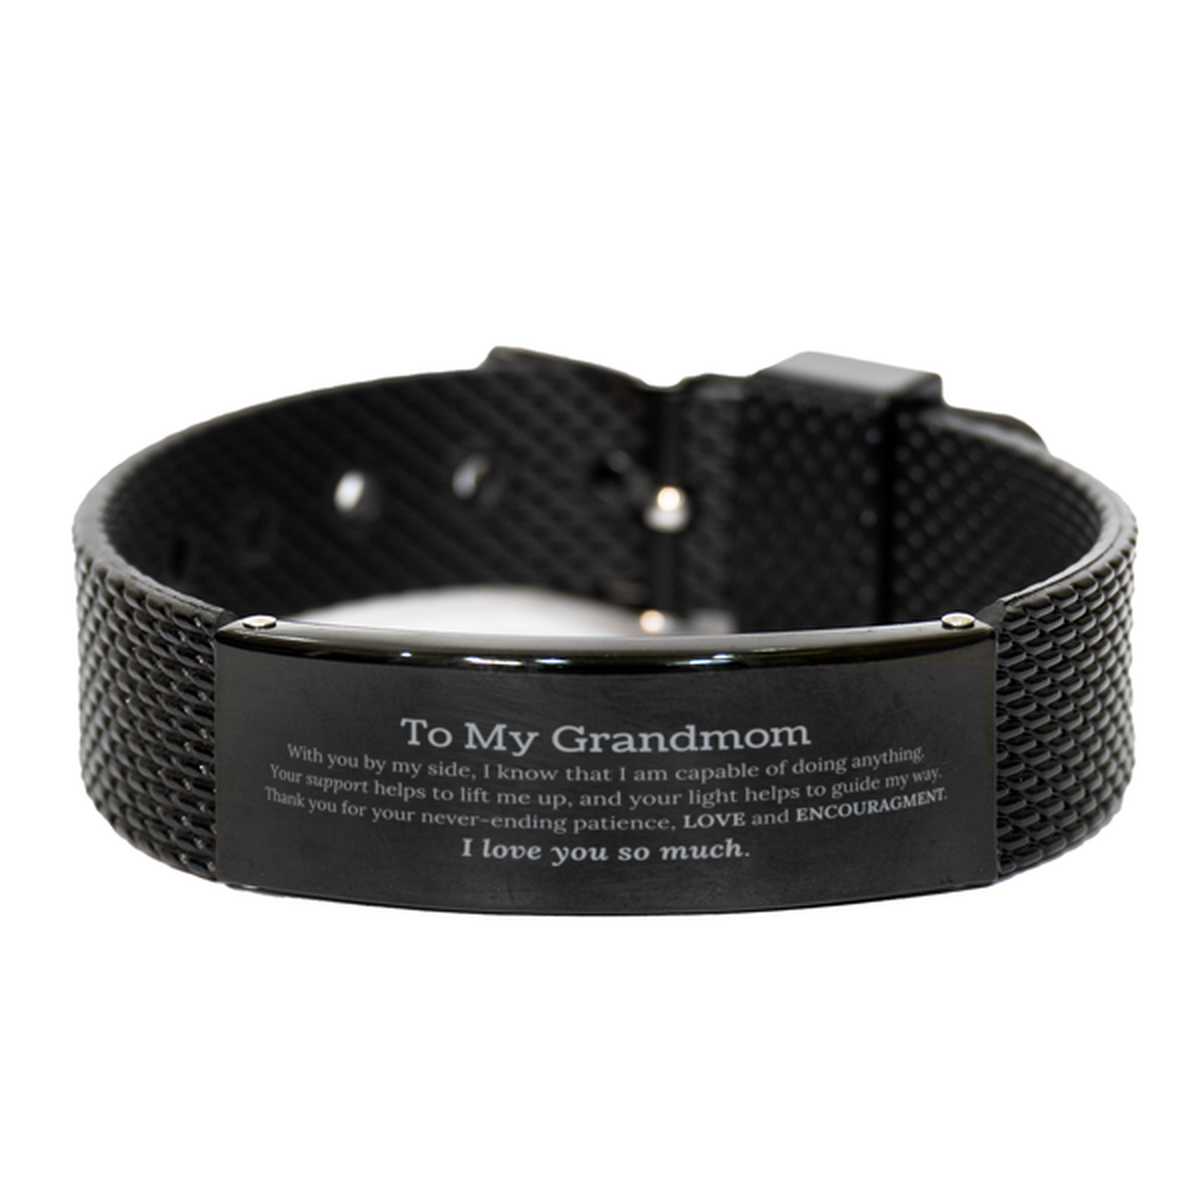 Appreciation Grandmom Black Shark Mesh Bracelet Gifts, To My Grandmom Birthday Christmas Wedding Keepsake Gifts for Grandmom With you by my side, I know that I am capable of doing anything. I love you so much